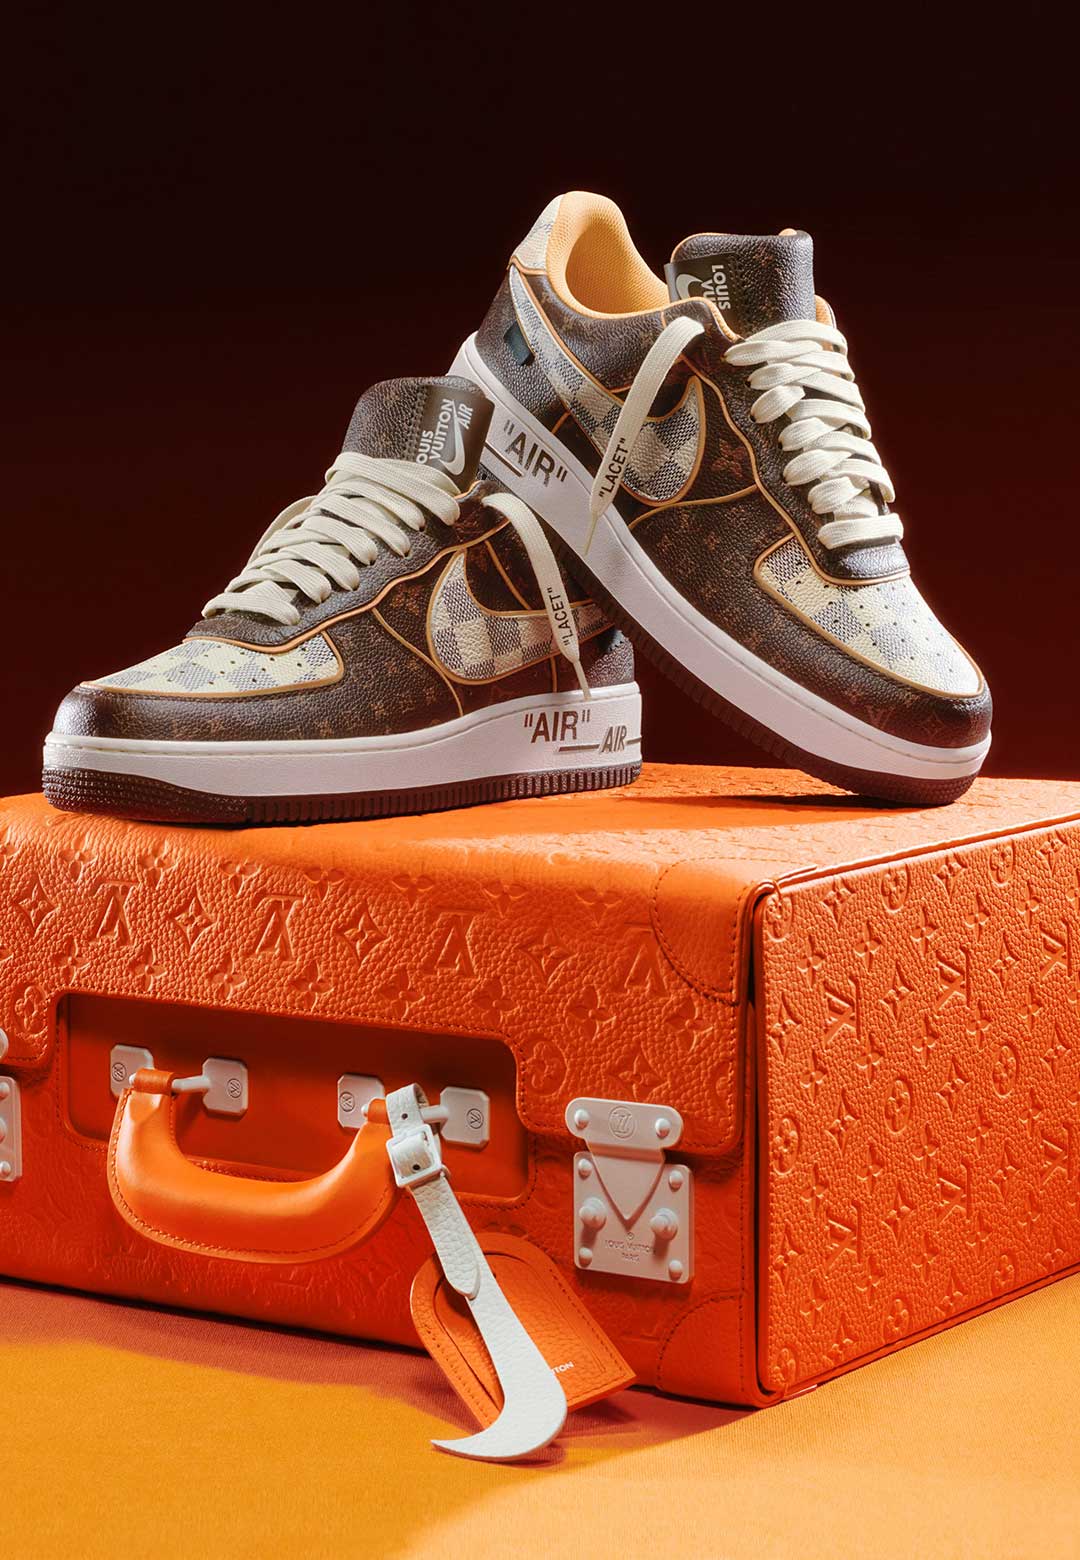 Virgil Abloh's LV x Nike sneakers fetch $25 million at Sotheby's ...